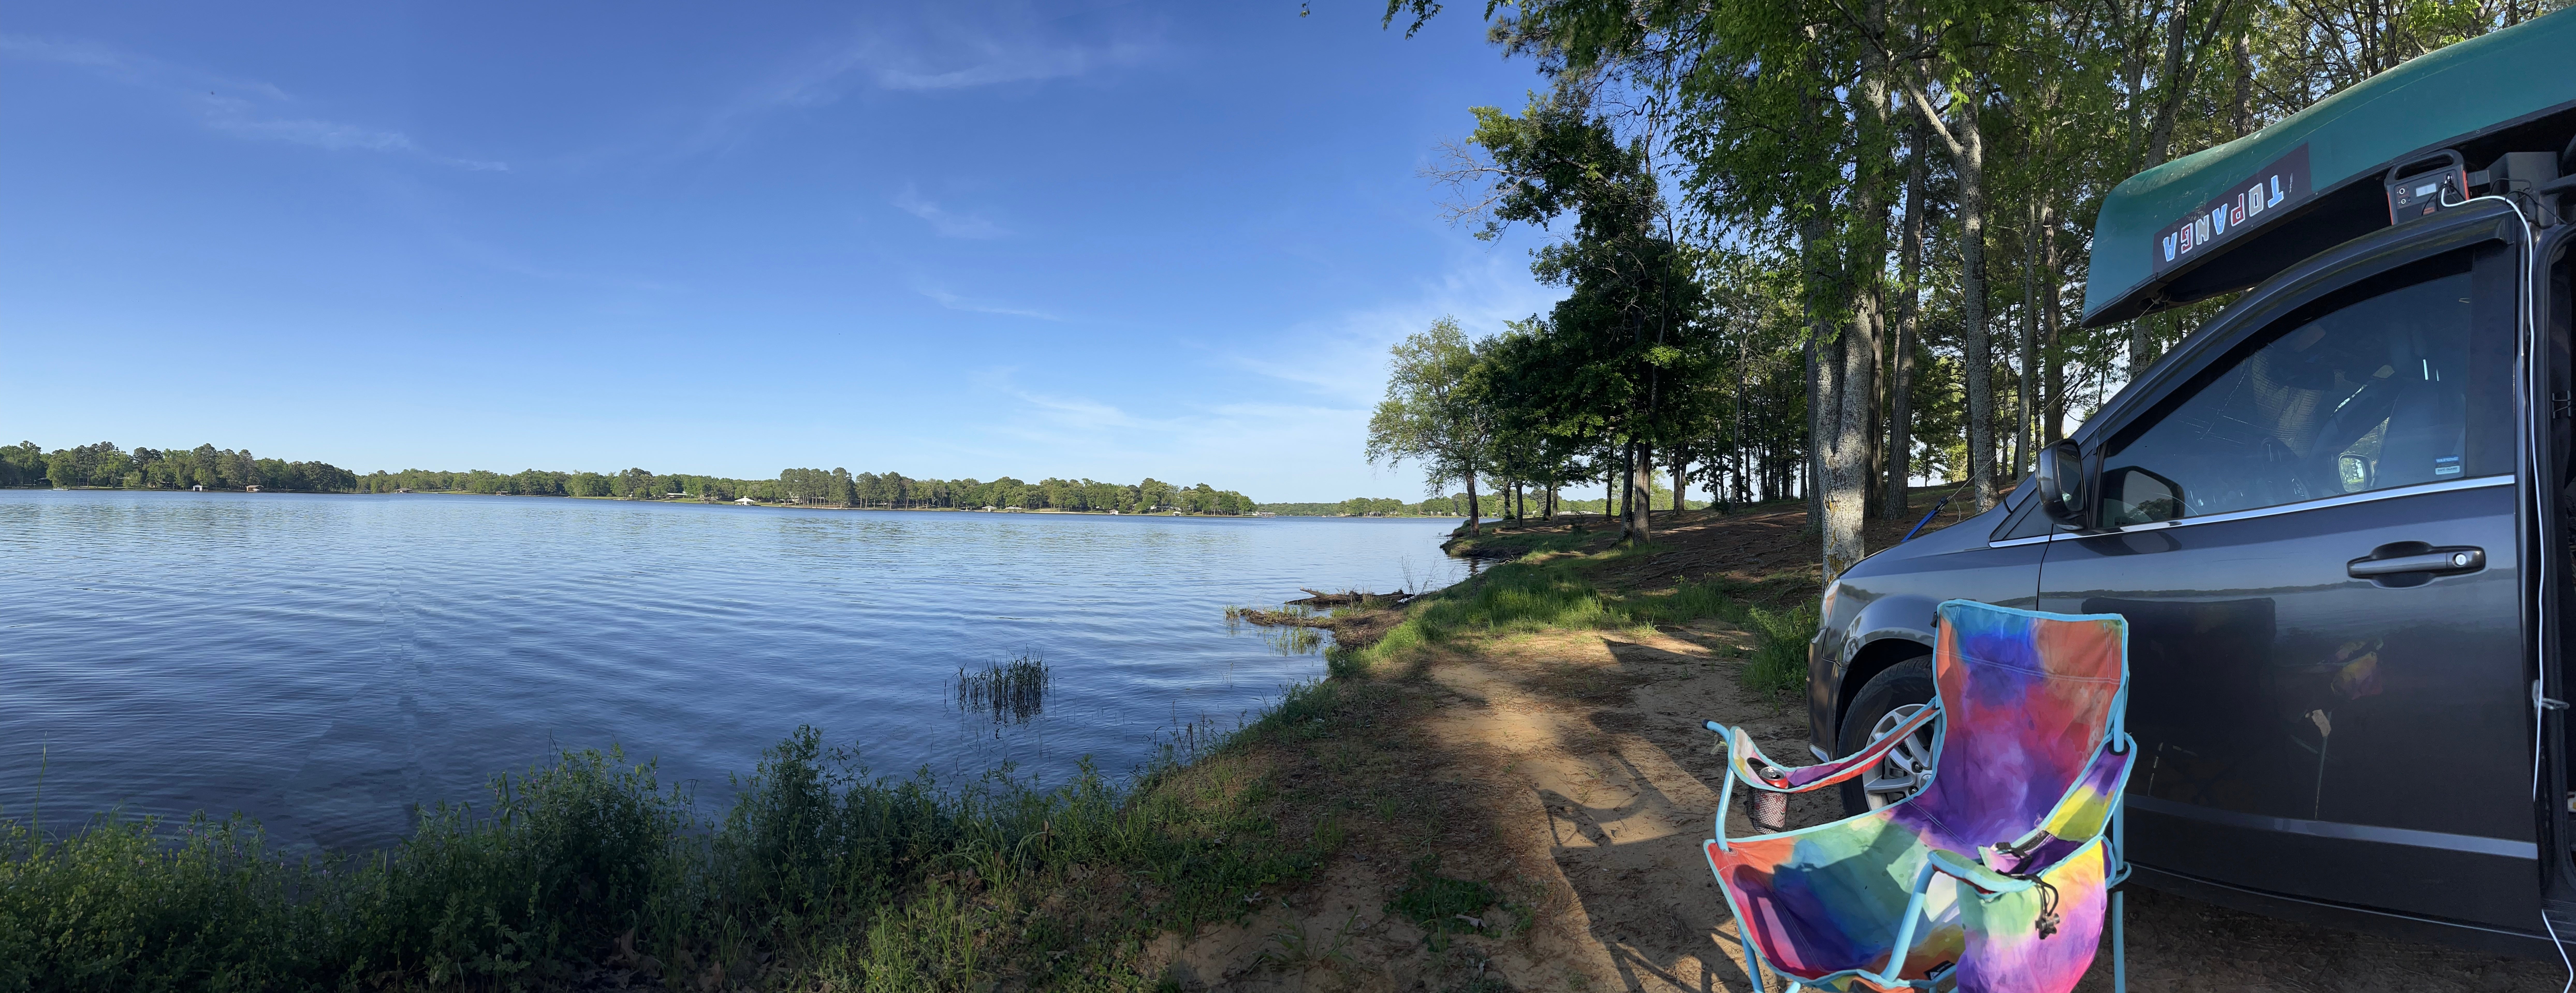 Camper submitted image from Lake Quitman West Dam - 1